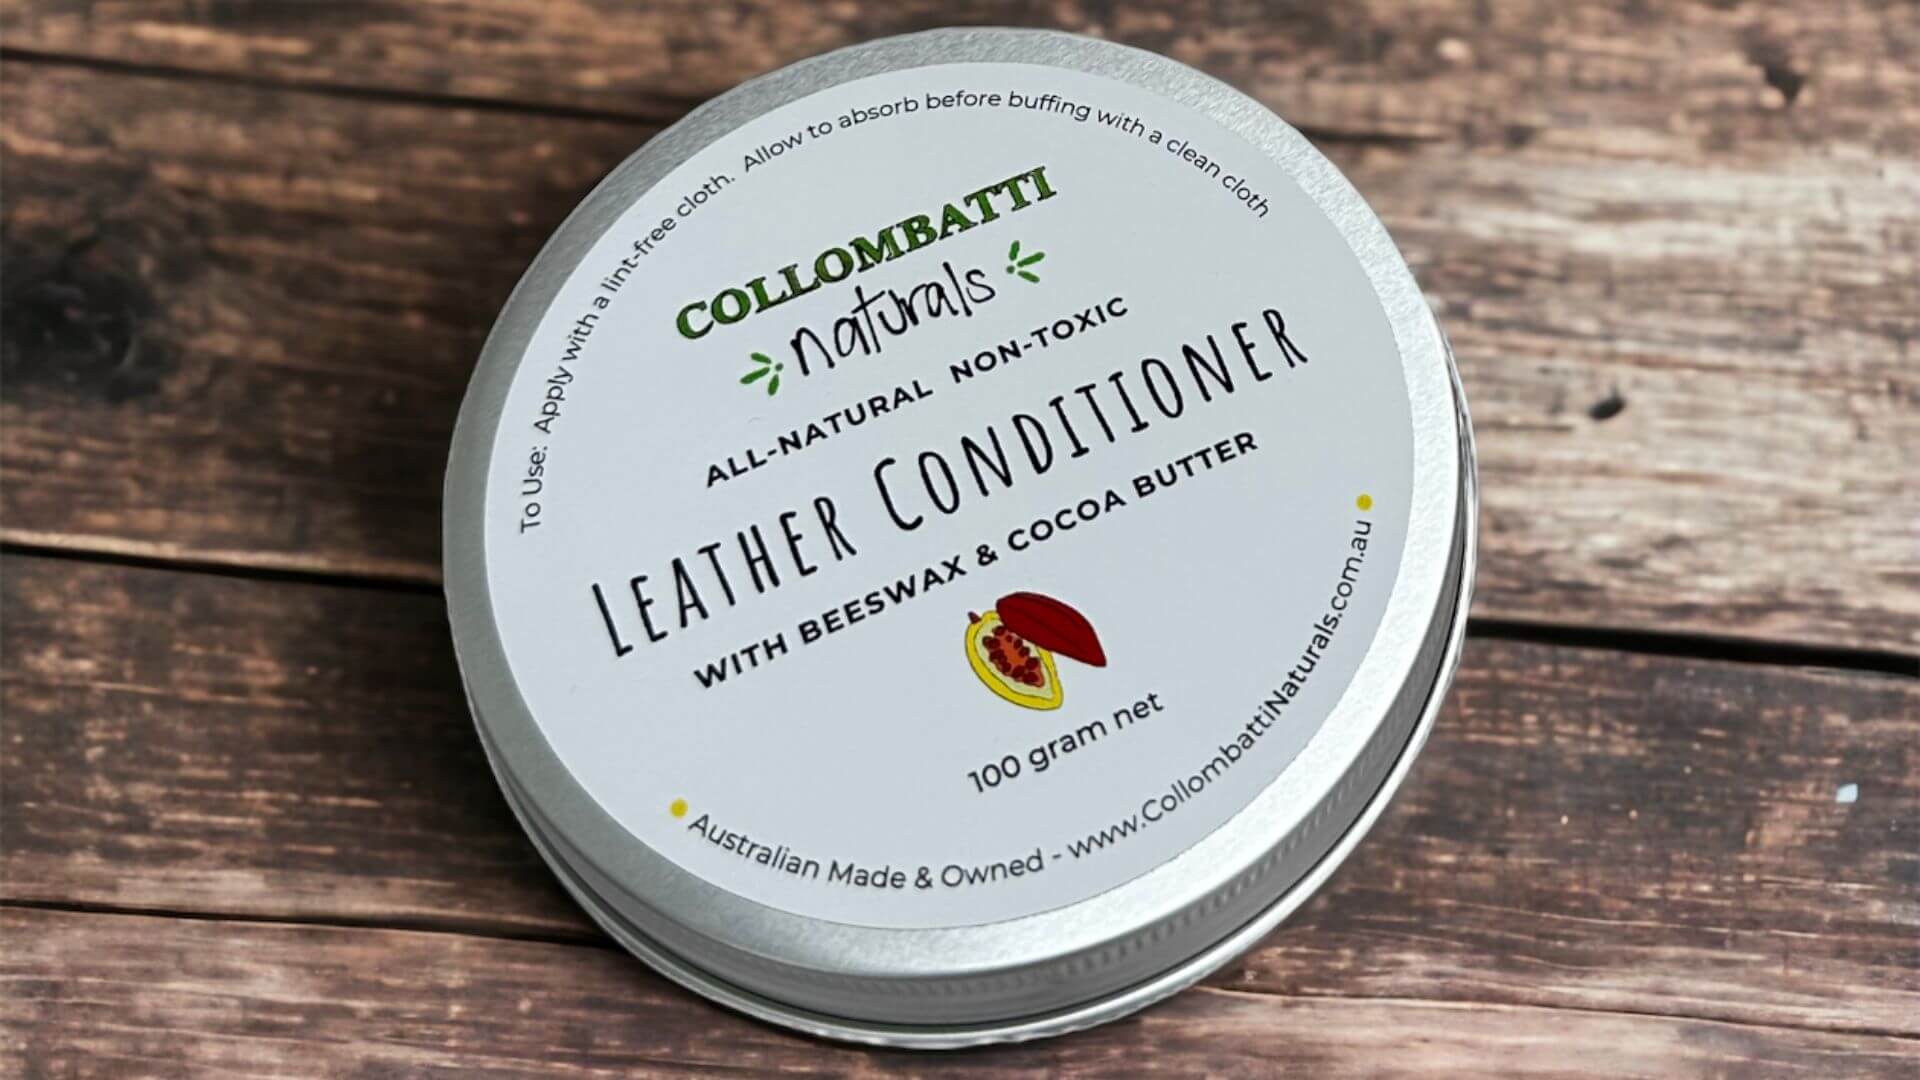 Collombatti Naturals step by step guide to using beeswax leather polish picture of beeswax leather conditioner in an aluminium container